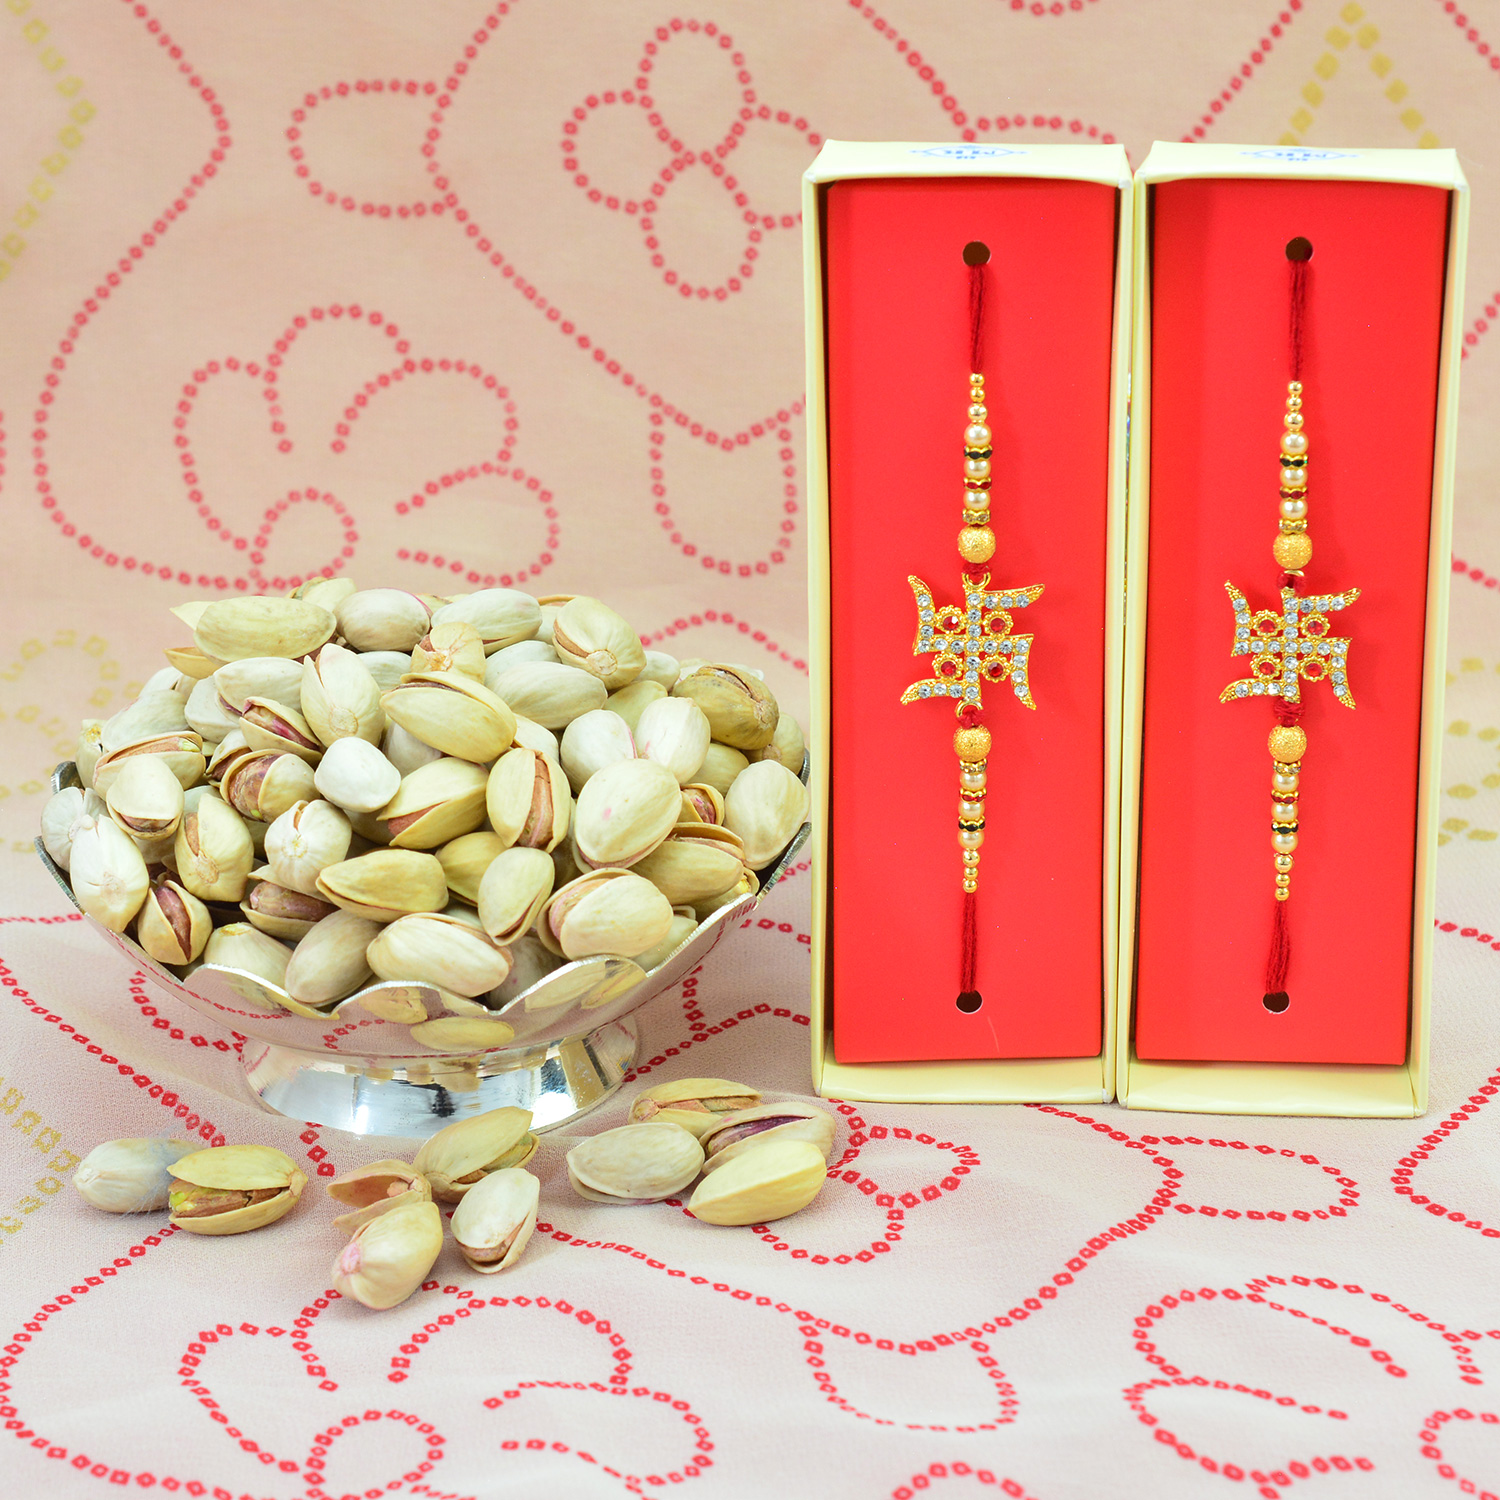 Amazing Design Swastika Rakhis with Dry Fruits of Healthy Pista or Pistachios